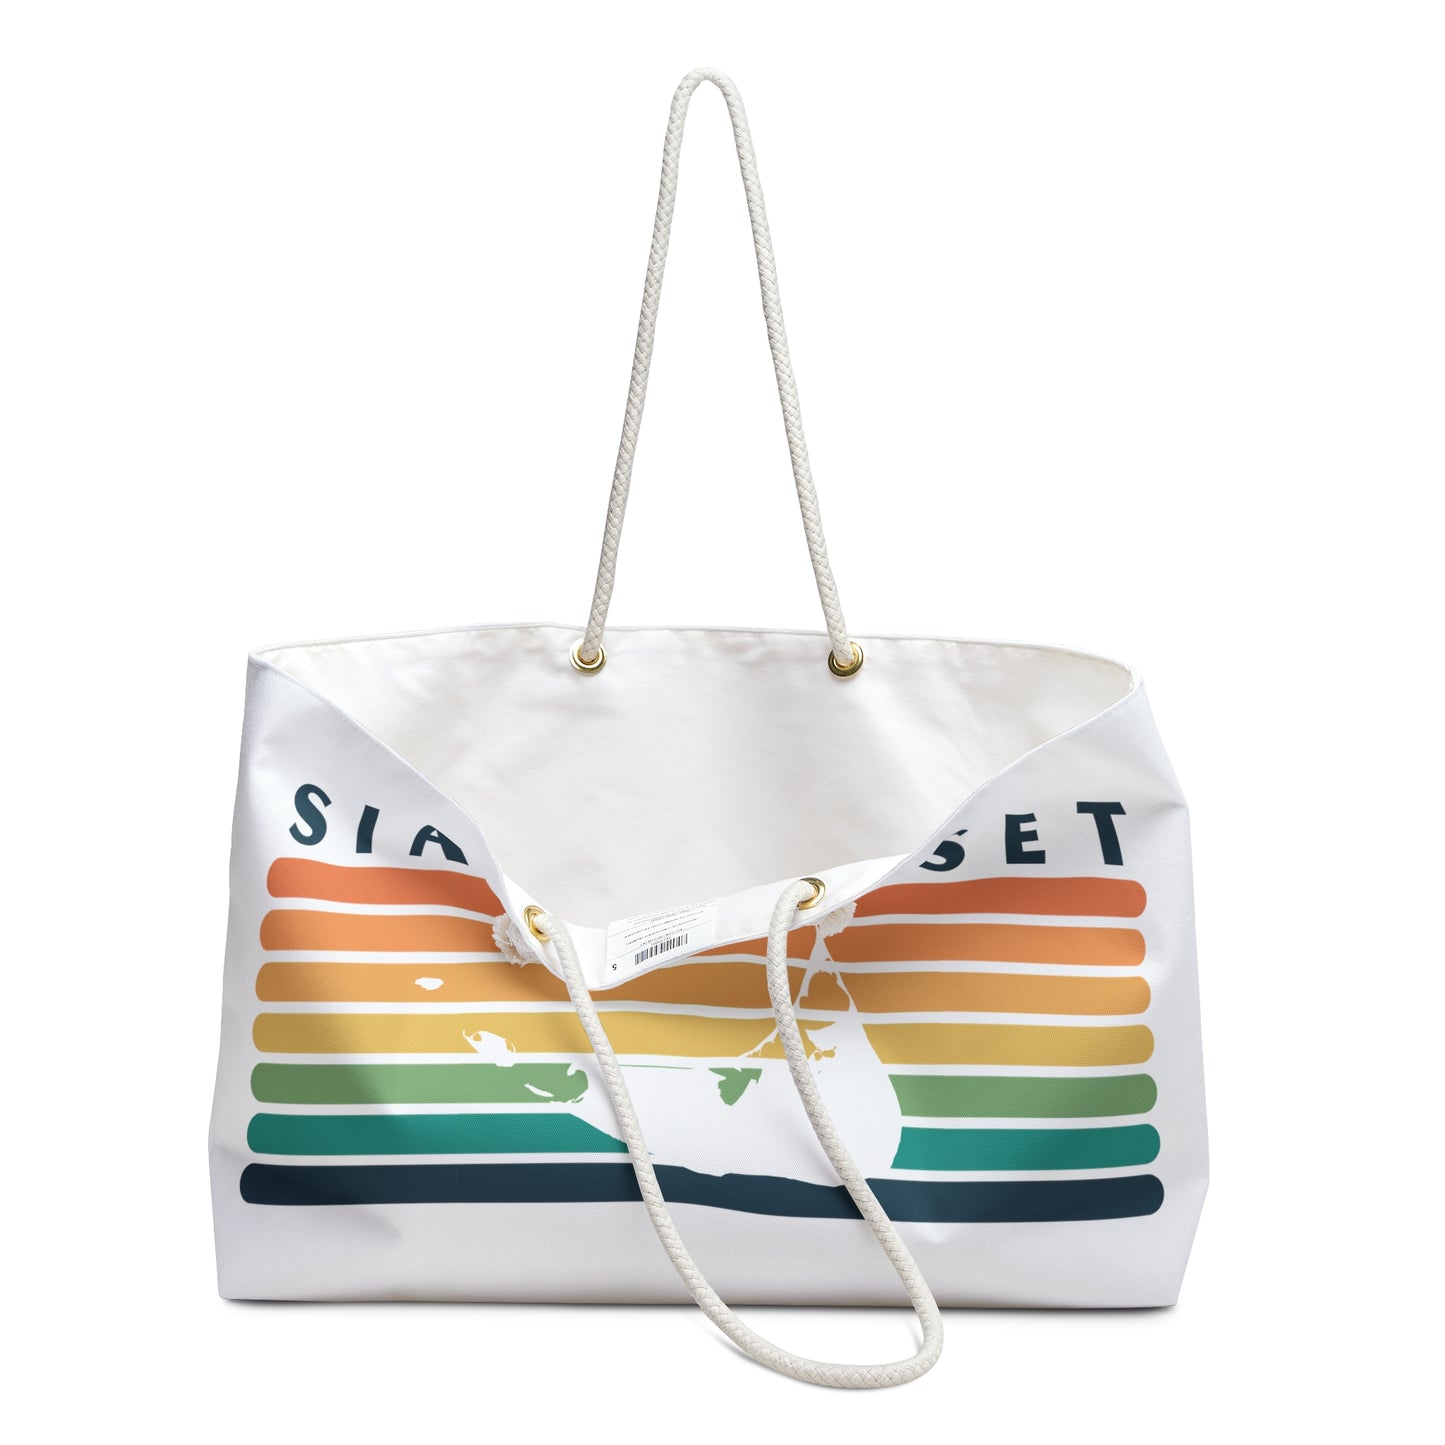 Siasconset Beach Bag - Oversized Weekender Tote, Perfect for Summer Adventures